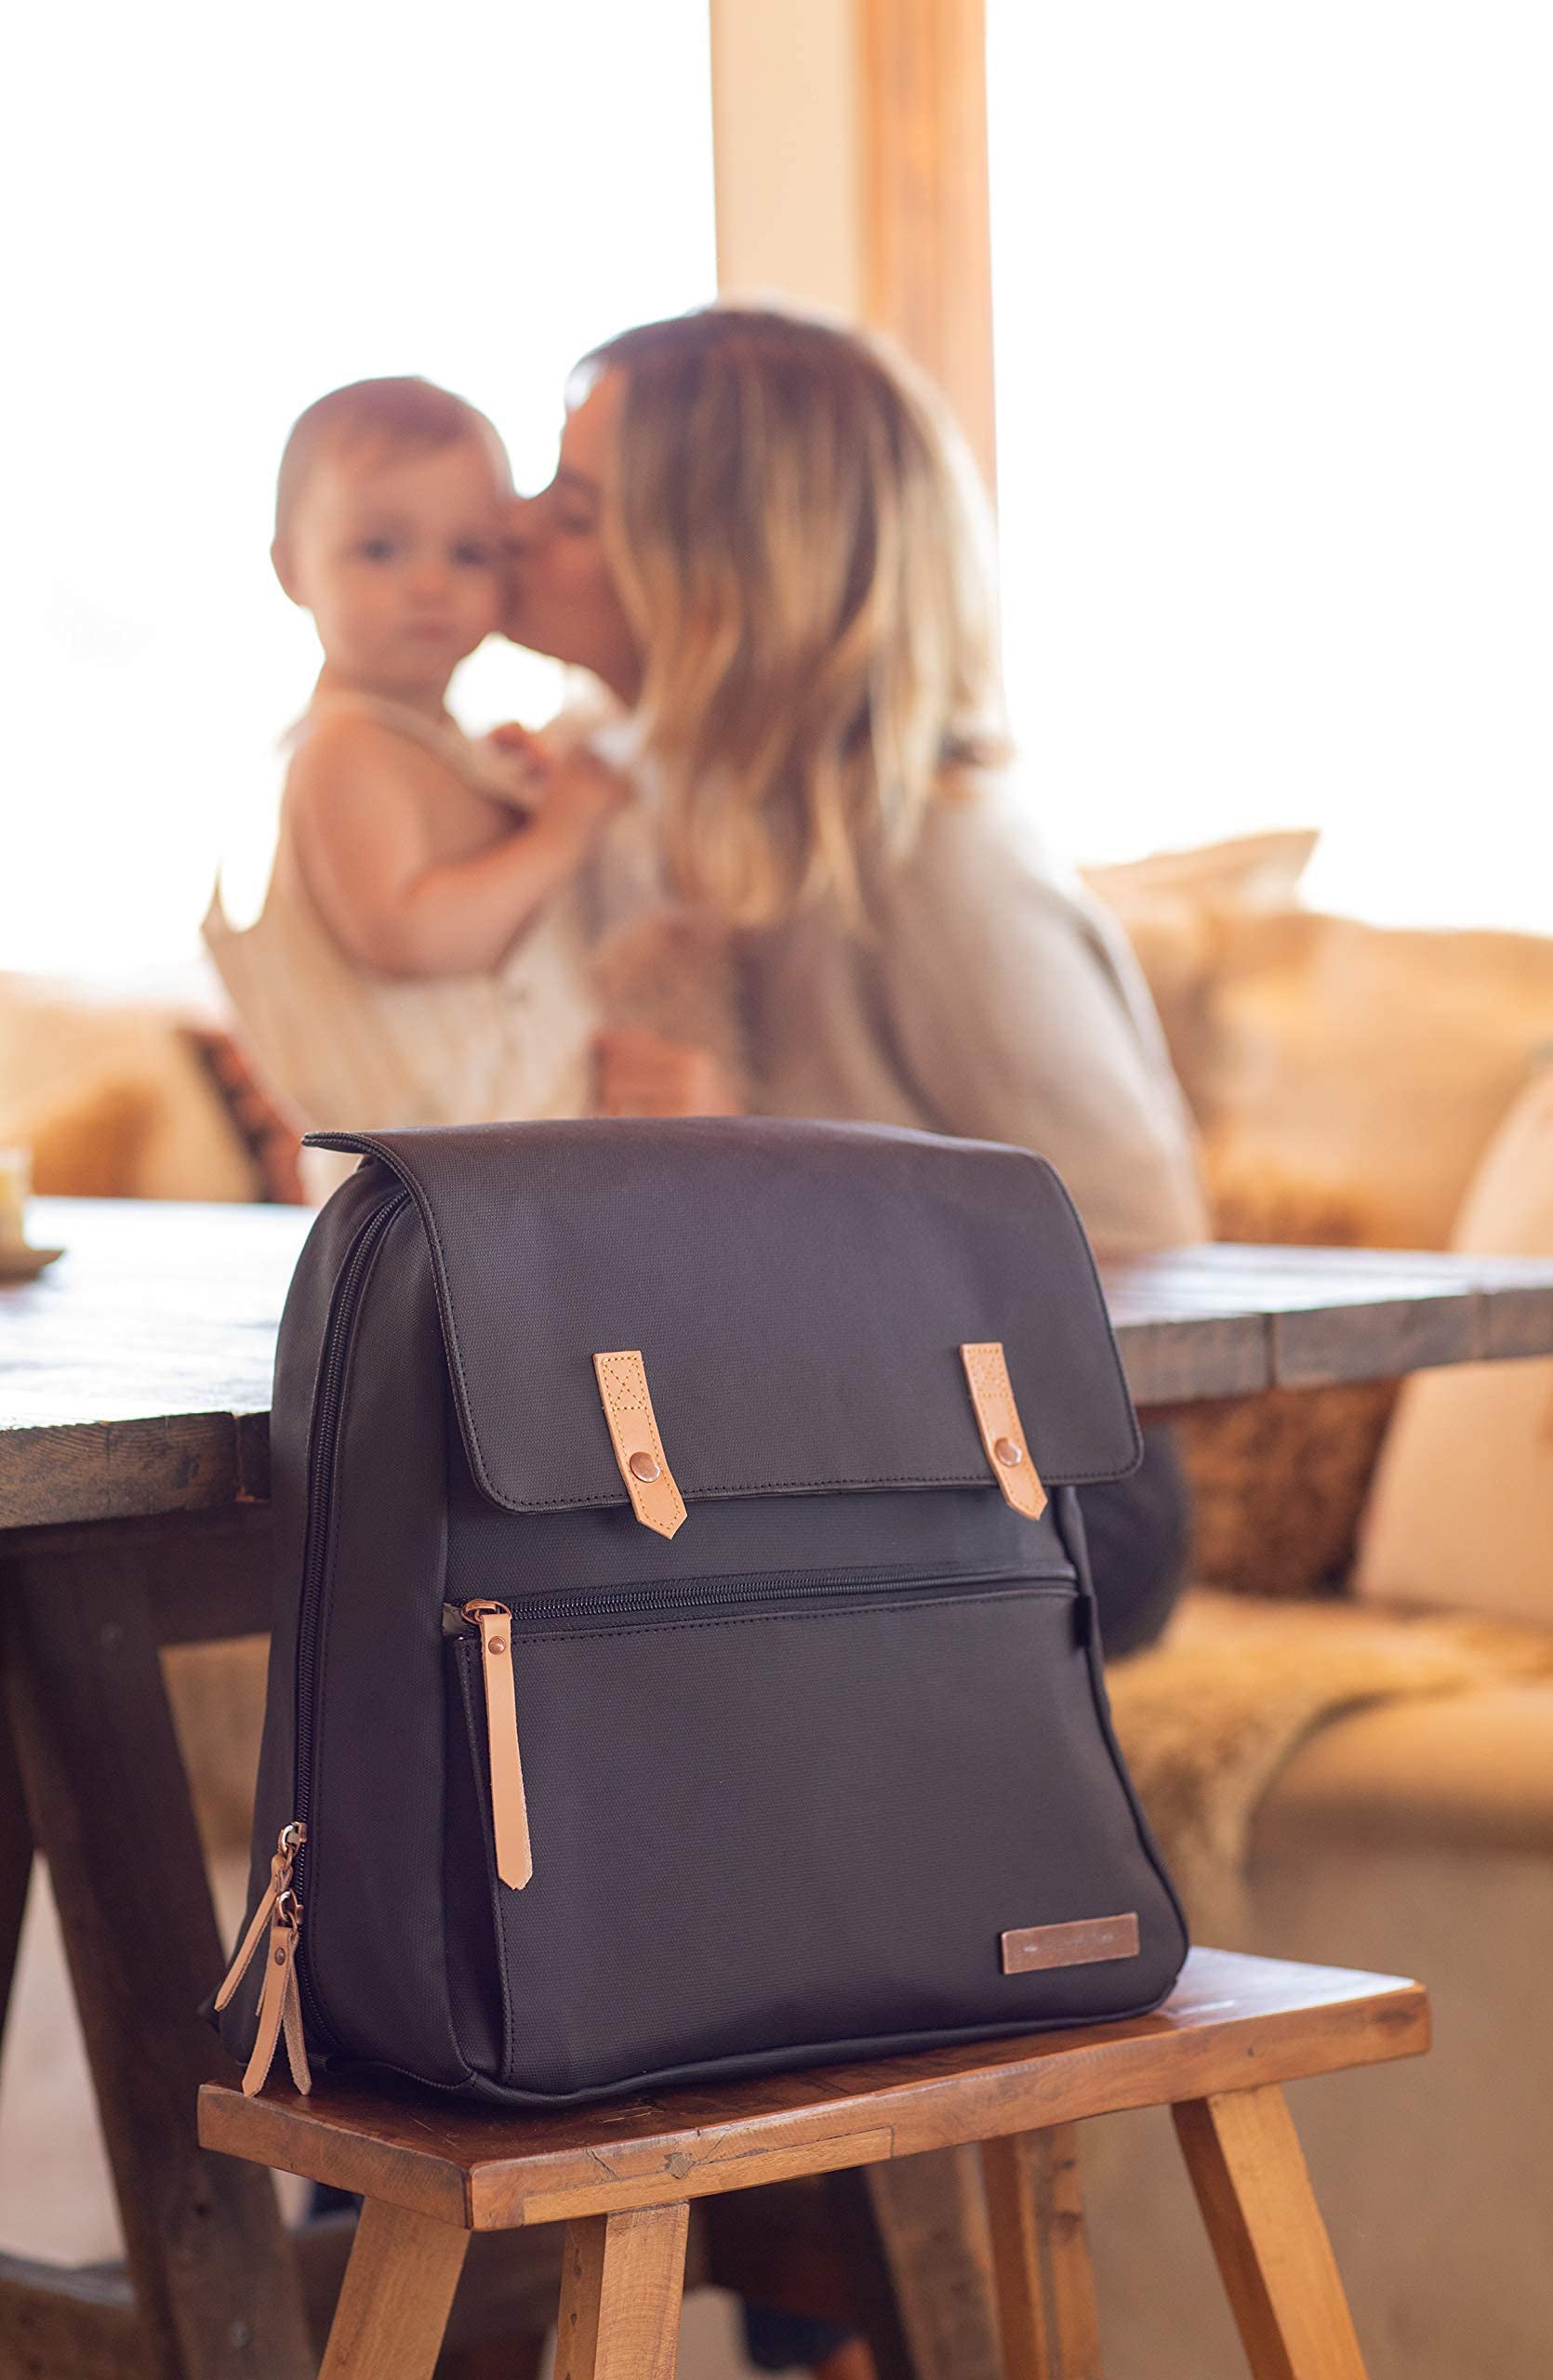 Petunia Pickle Bottom Meta Backpack | Baby Bag | Diaper Bag Backpack for Parents | Stylish Bag and Organizer | Comfortable, Spacious, and Sleek Backpack for On the Go Moms and Dads| Black Matte Canvas